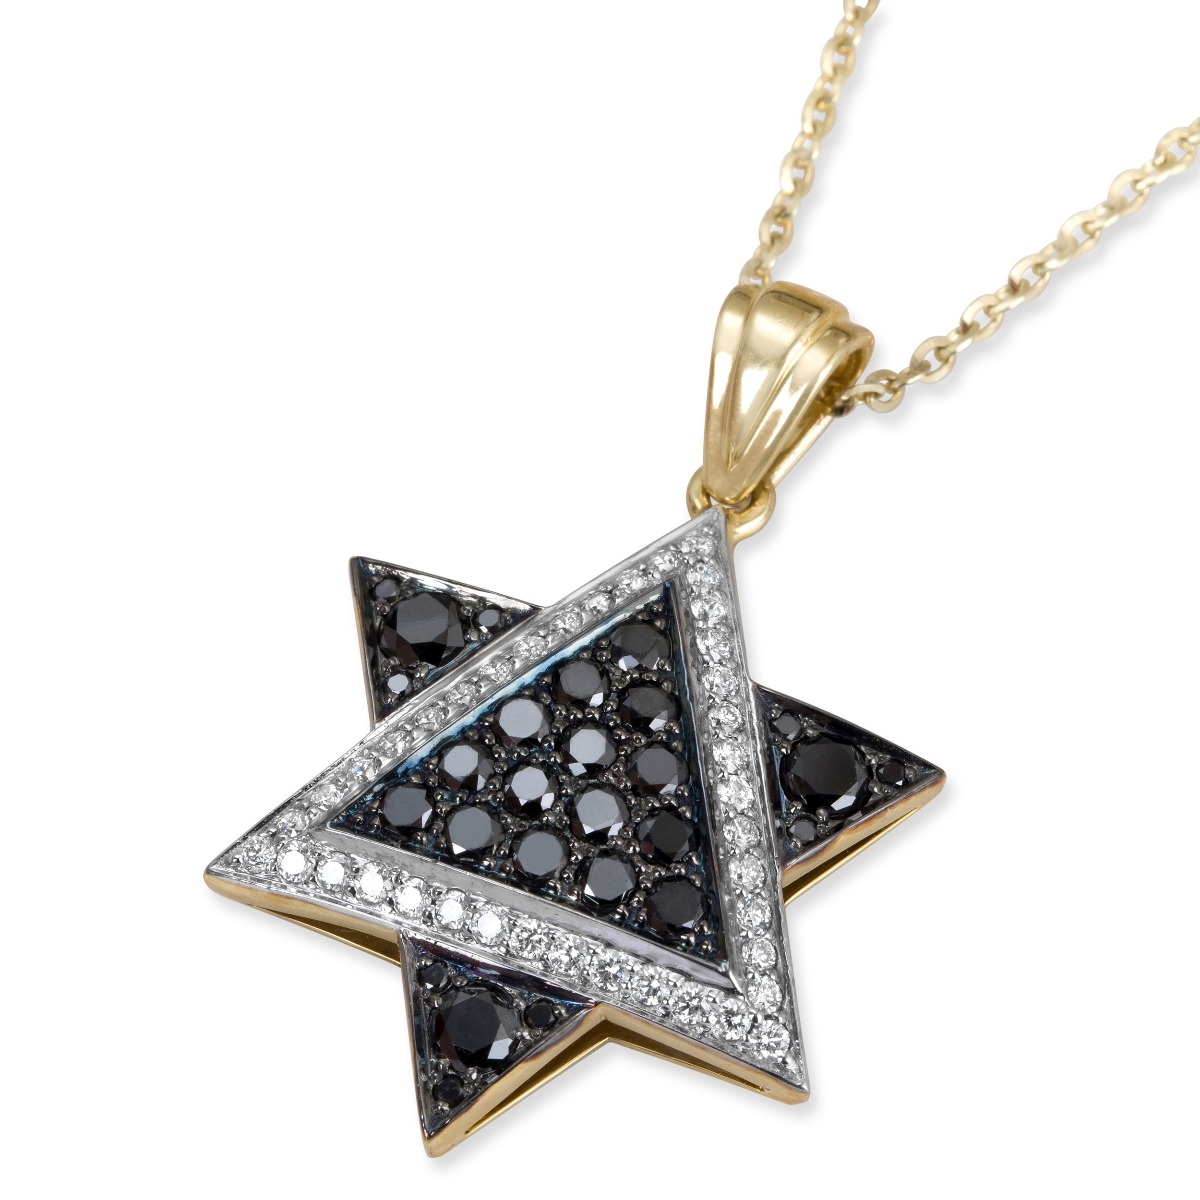 14K Gold Star of David Pendant Accented With 66 White & Black Diamonds - 1